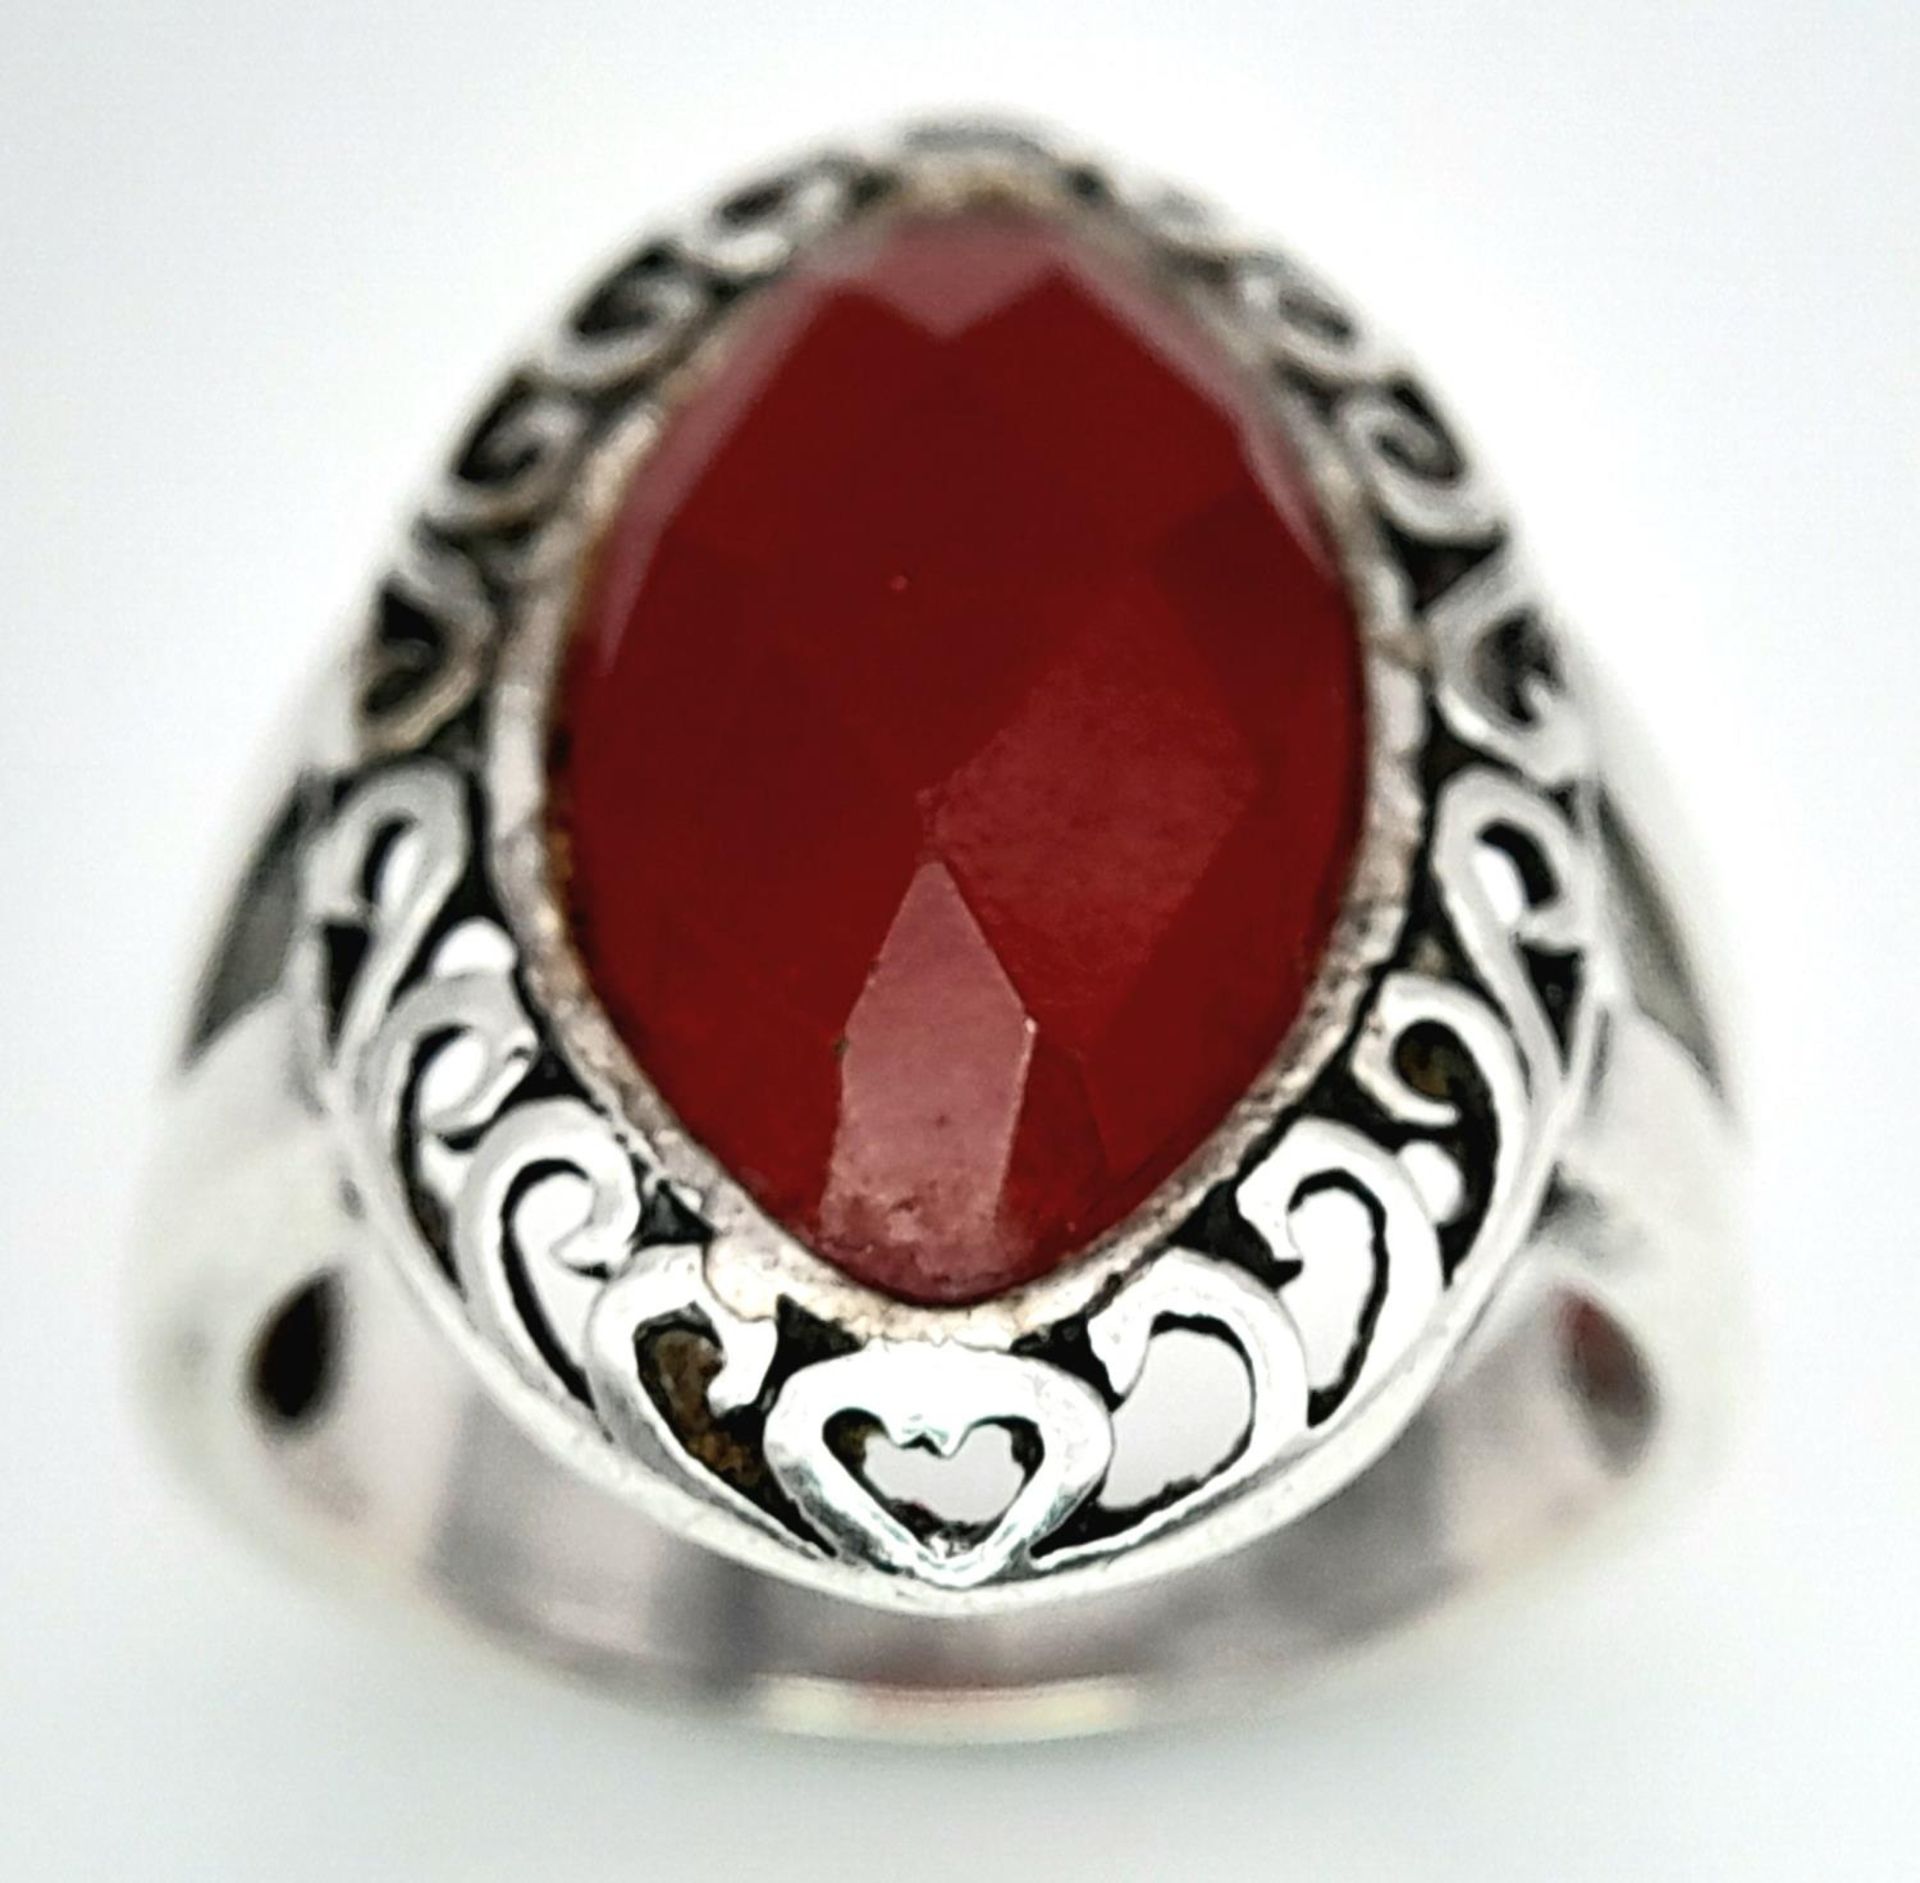 A Red Stone on 925 Silver Ring. Size P, 5.85g total weight.